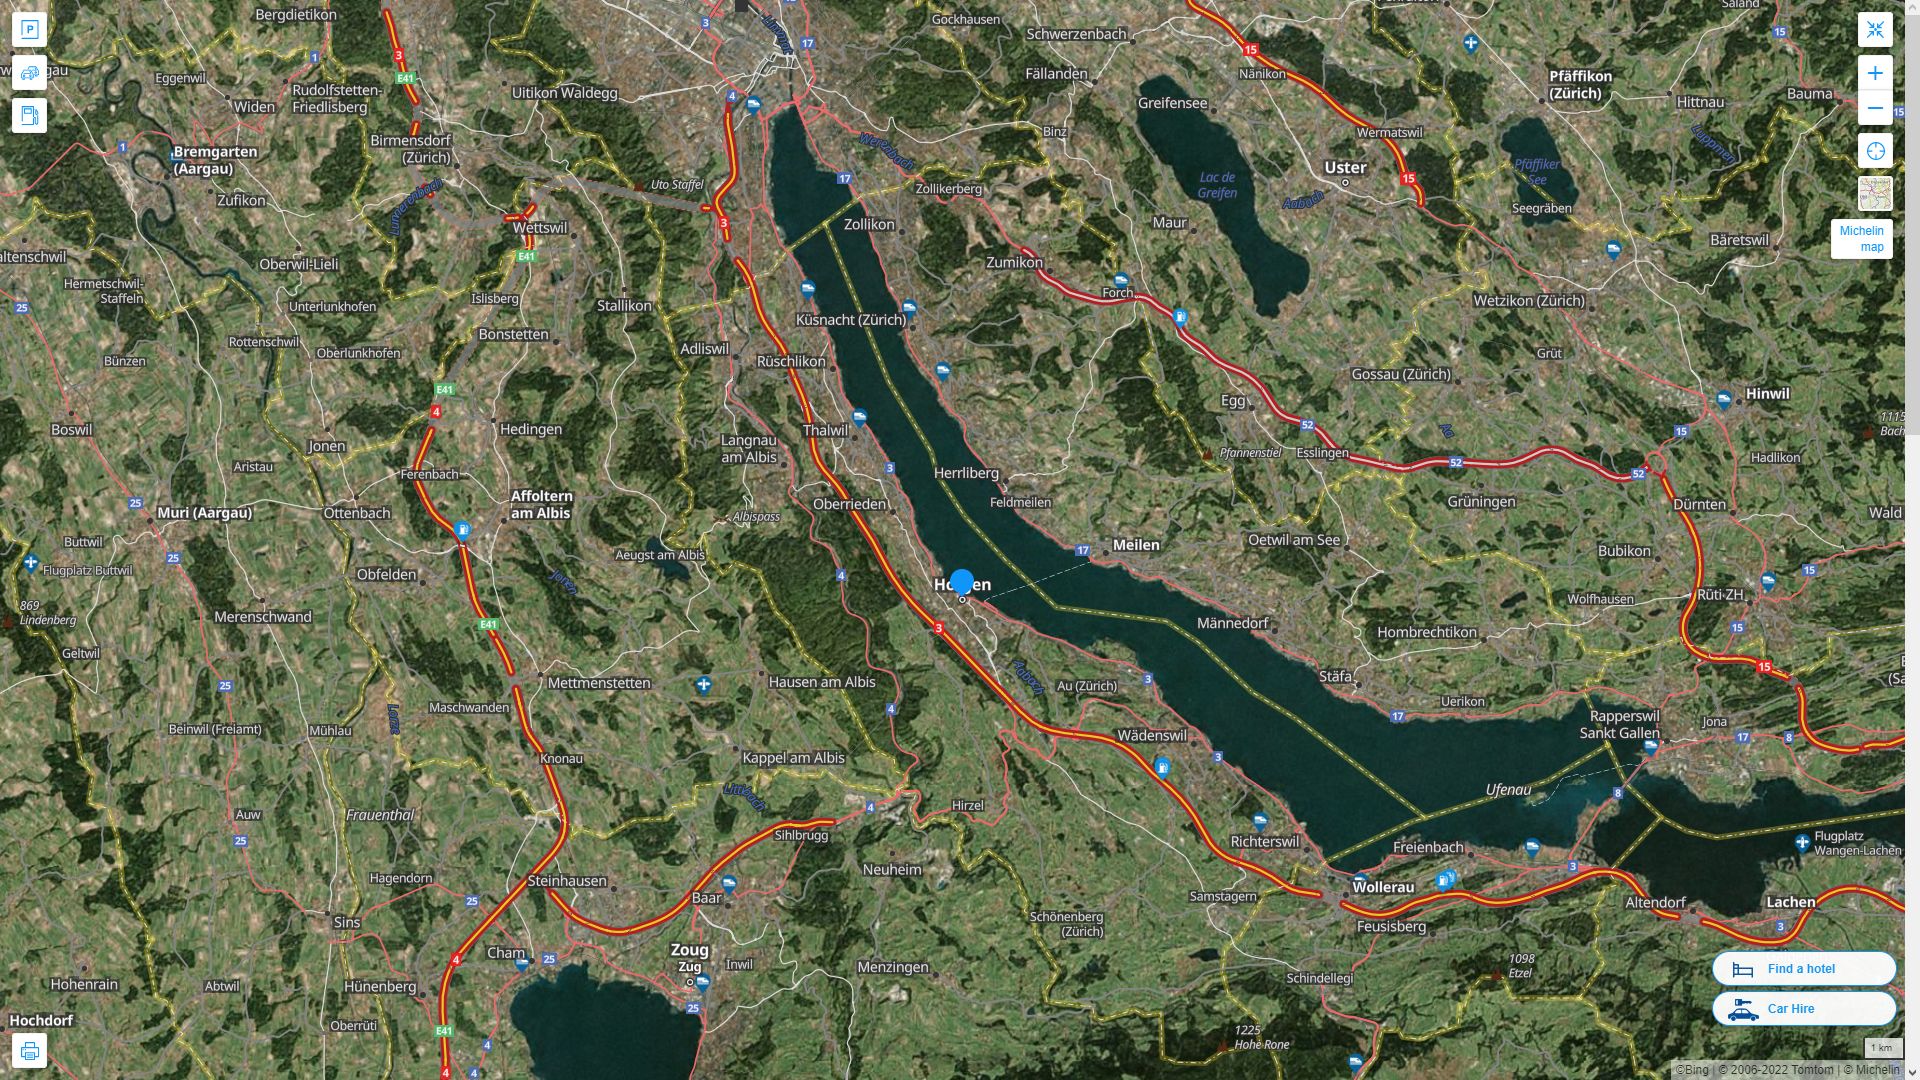 Horgen Highway and Road Map with Satellite View